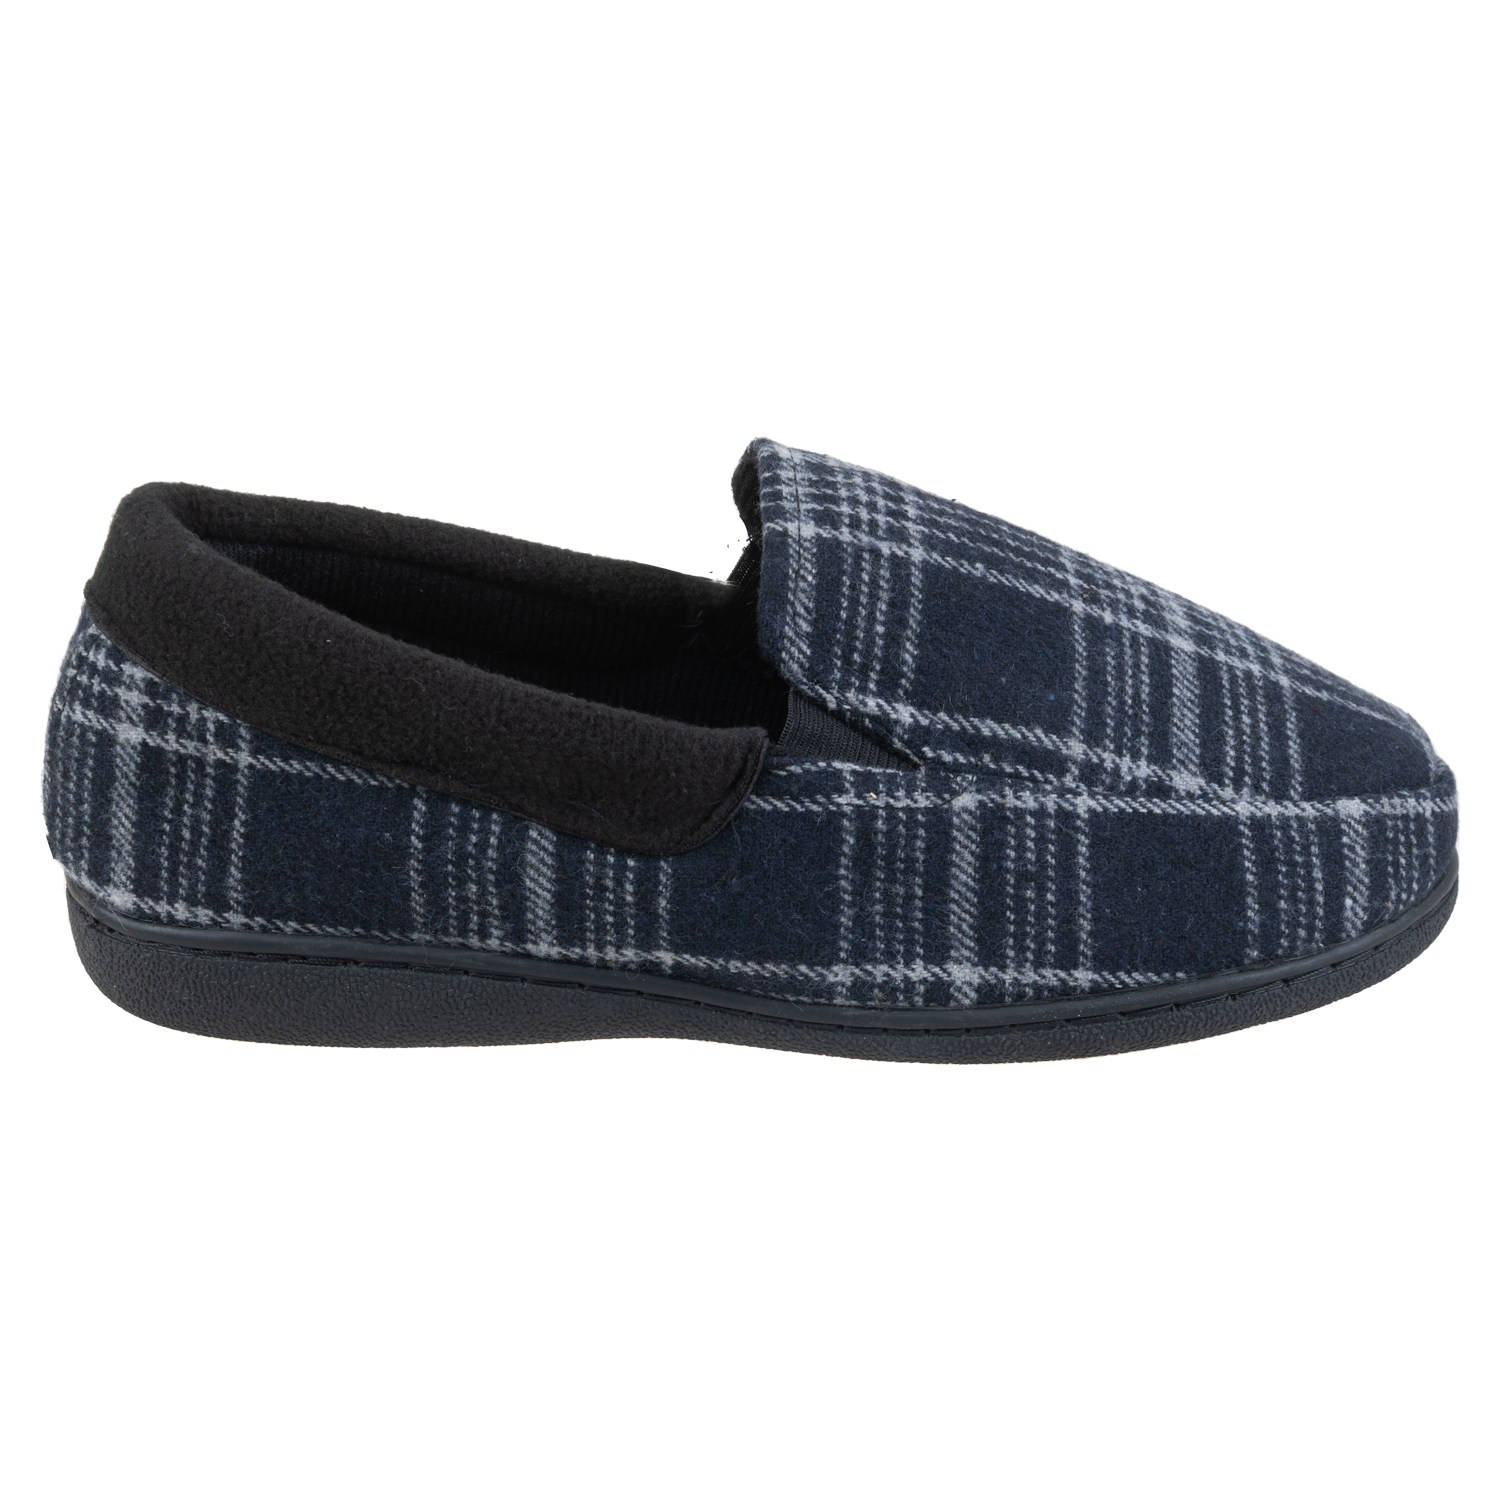 Moccasin-style house slippers - Navy plaid, size L